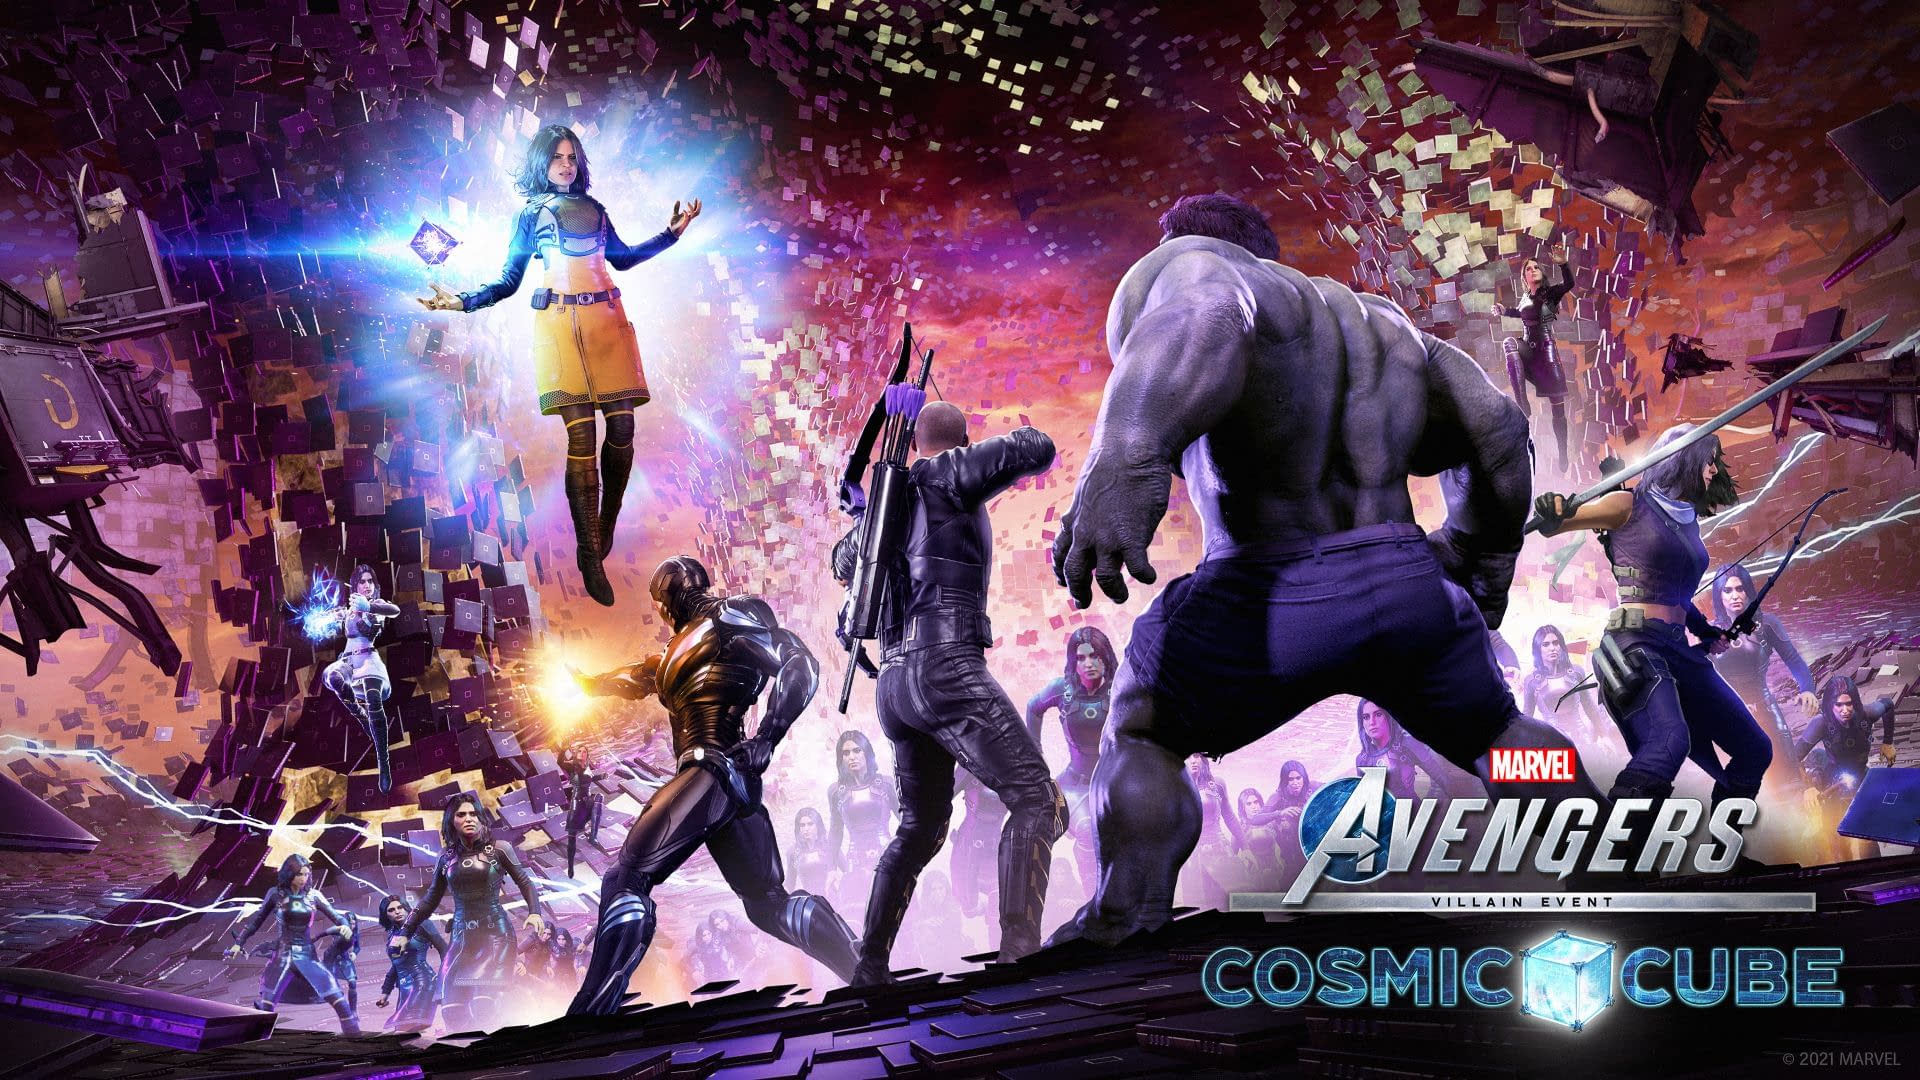 Marvel S Avengers Next Event Takes On The Cosmic Cube